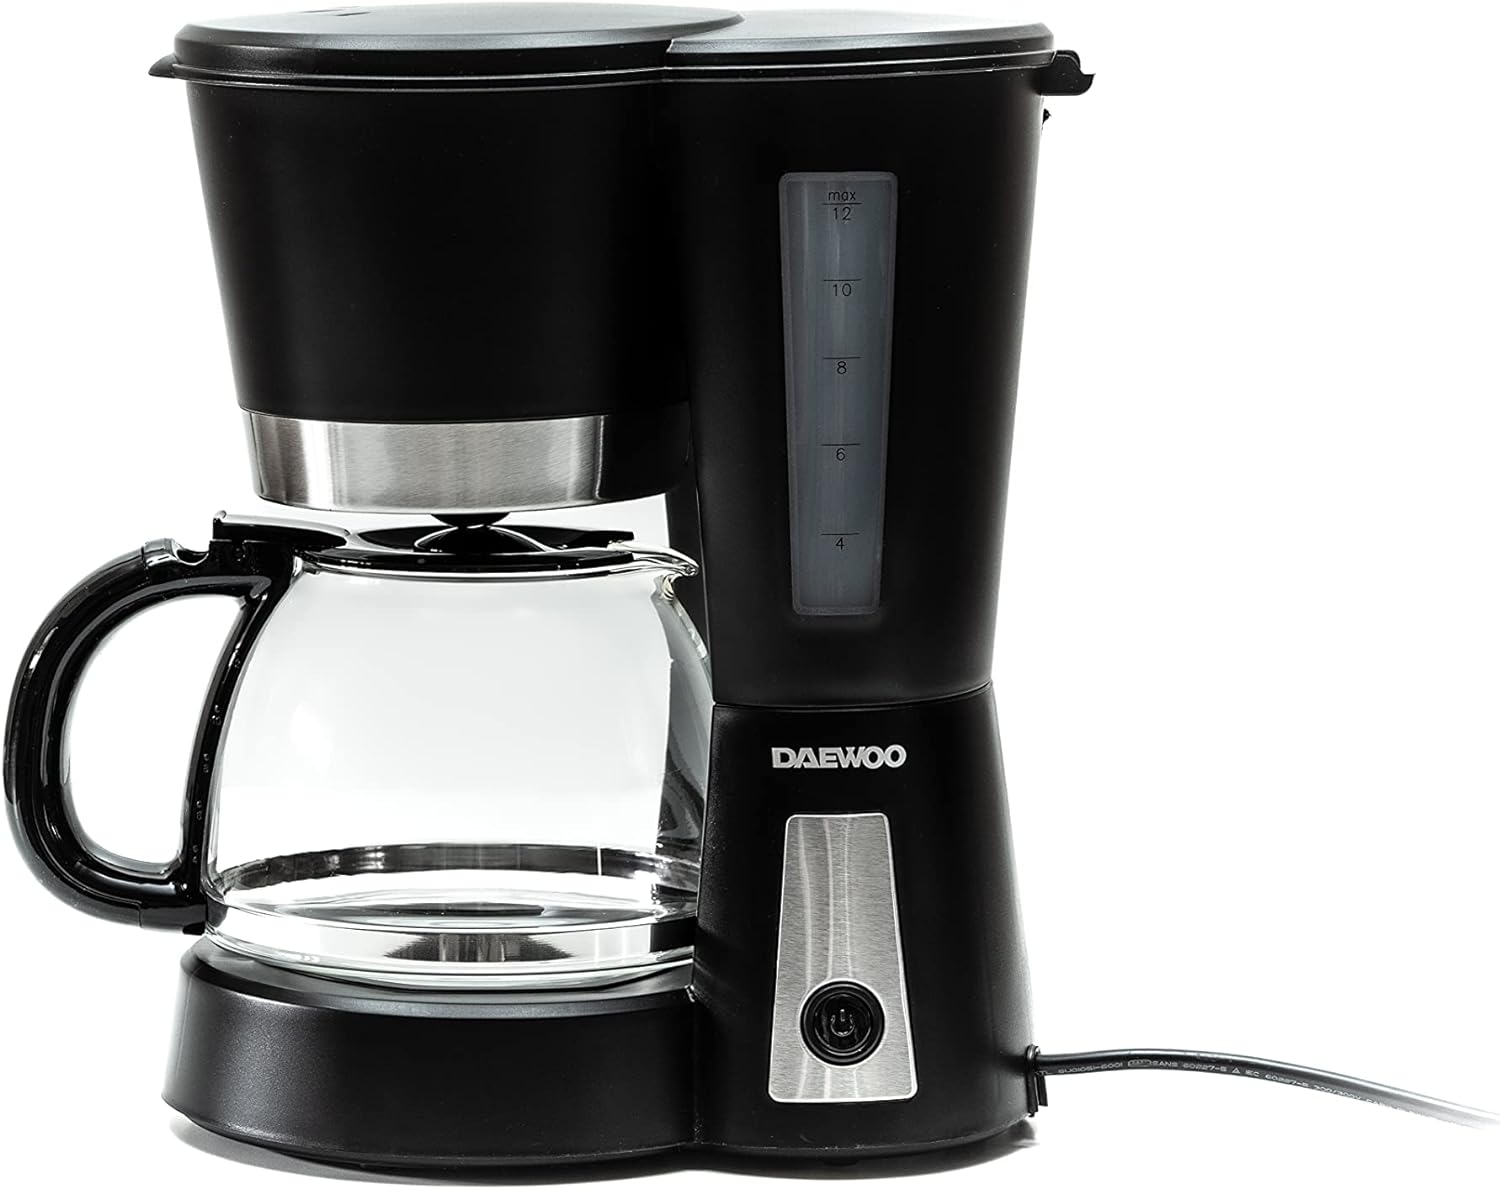 Oster 220 volts coffee maker small 5 Cup BVSTDC05-053 coffee machine 220v  240 volts 50 hz